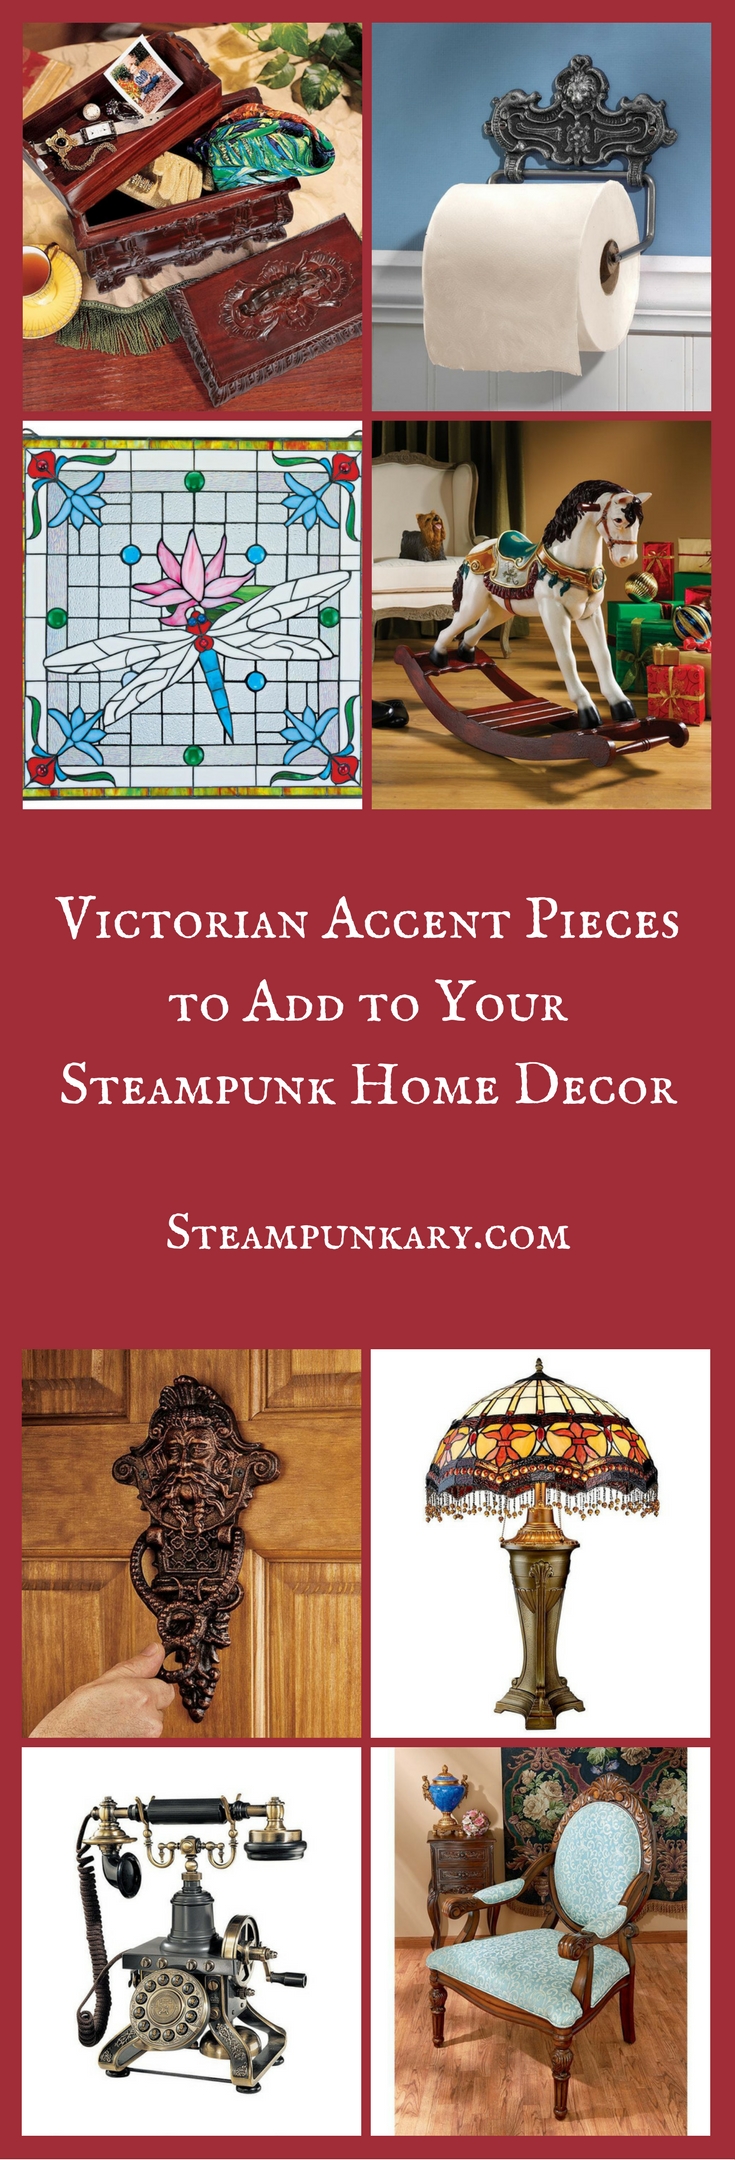 Victorian Accent Pieces to Add to Your Steampunk Home Decor